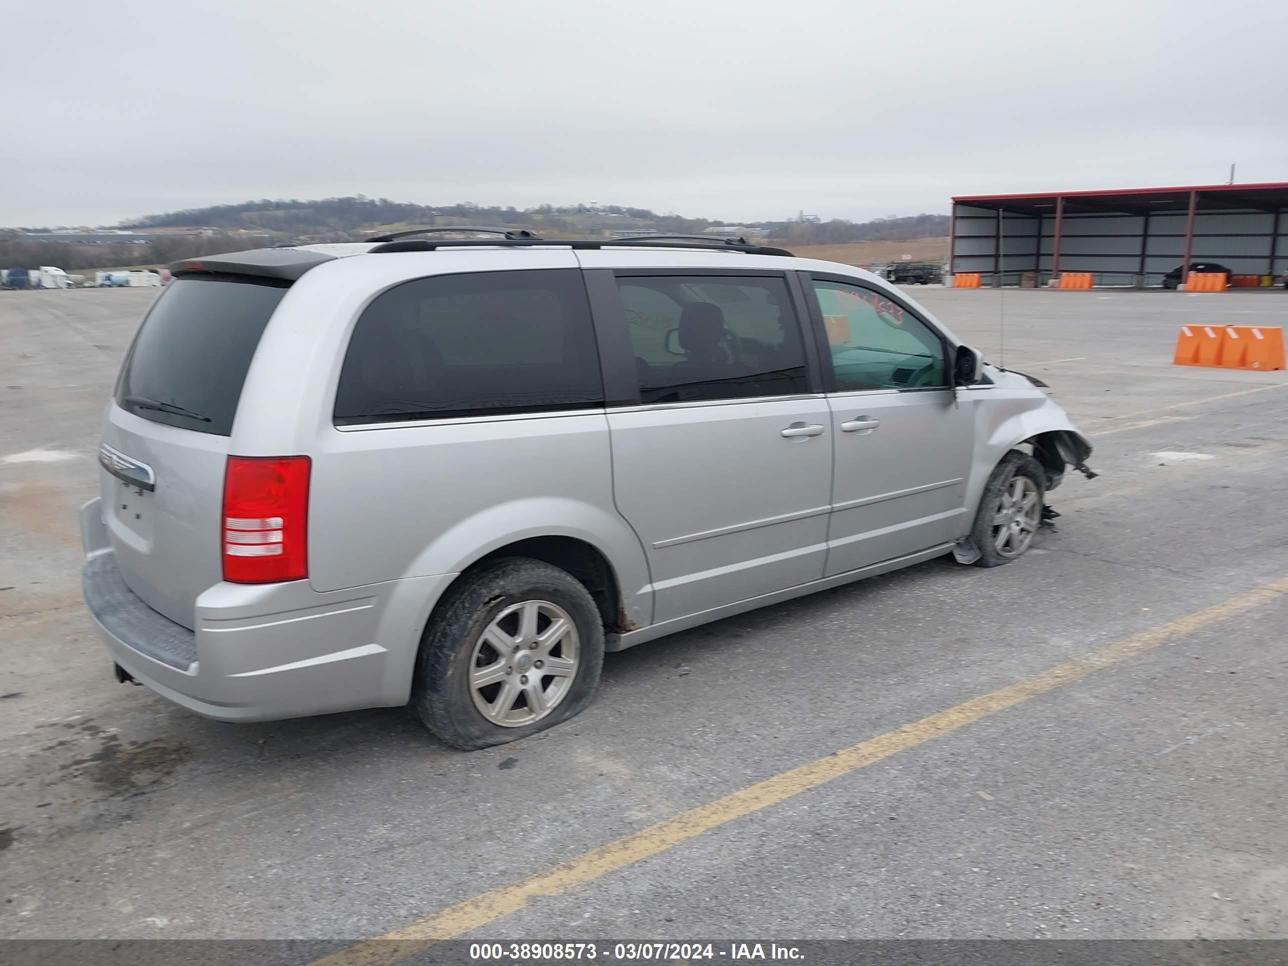 2A8HR54PX8R817399  - CHRYSLER TOWN & COUNTRY  2008 IMG - 3